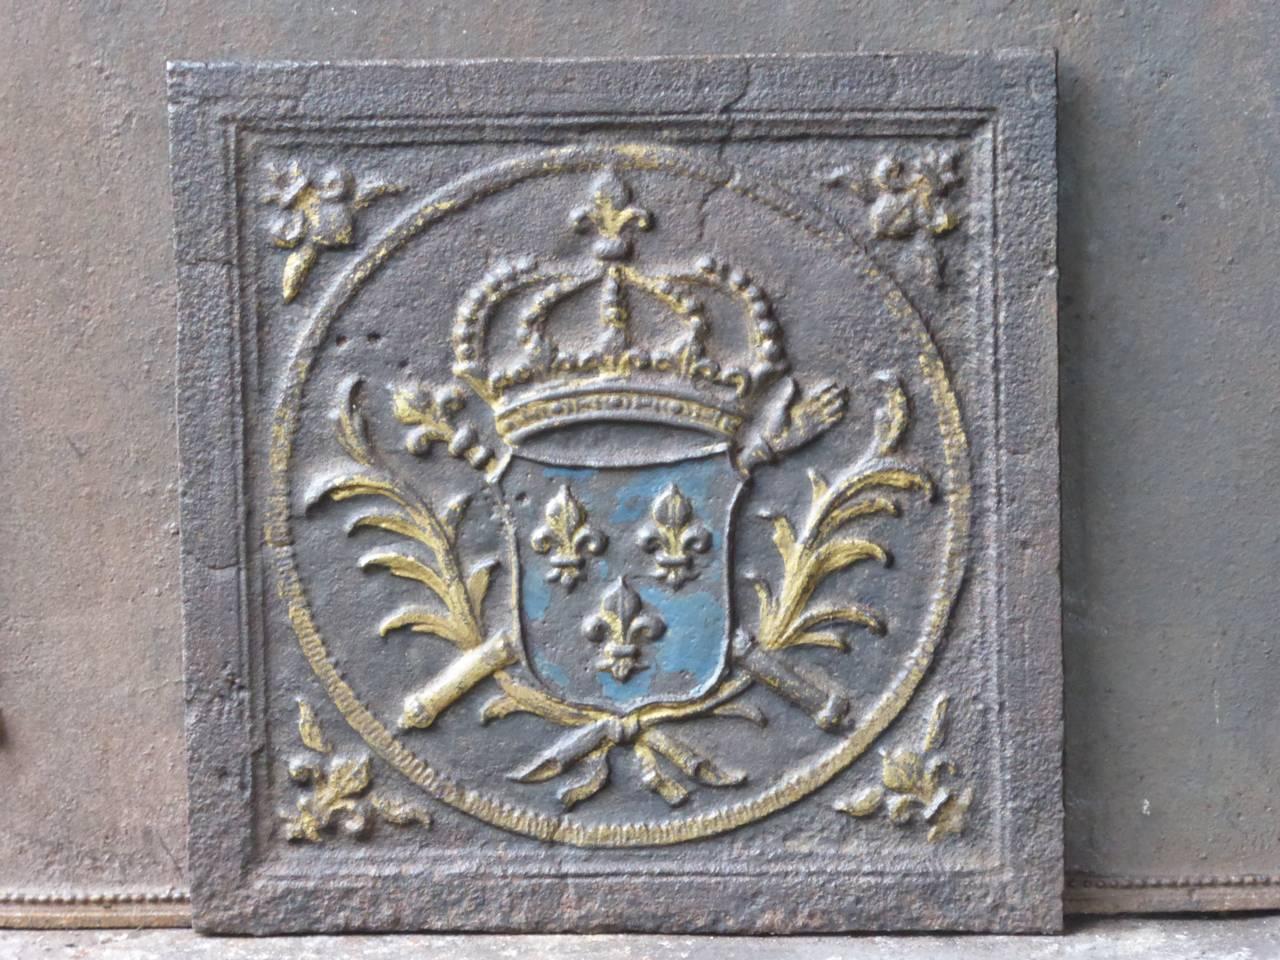 18th-19th century French fireback with the arms of France. Coat of arms of the House of Bourbon, an originally French royal house that became a major dynasty in Europe. It delivered kings for Spain (Navarra), France, both Sicilies and Parma. Bourbon